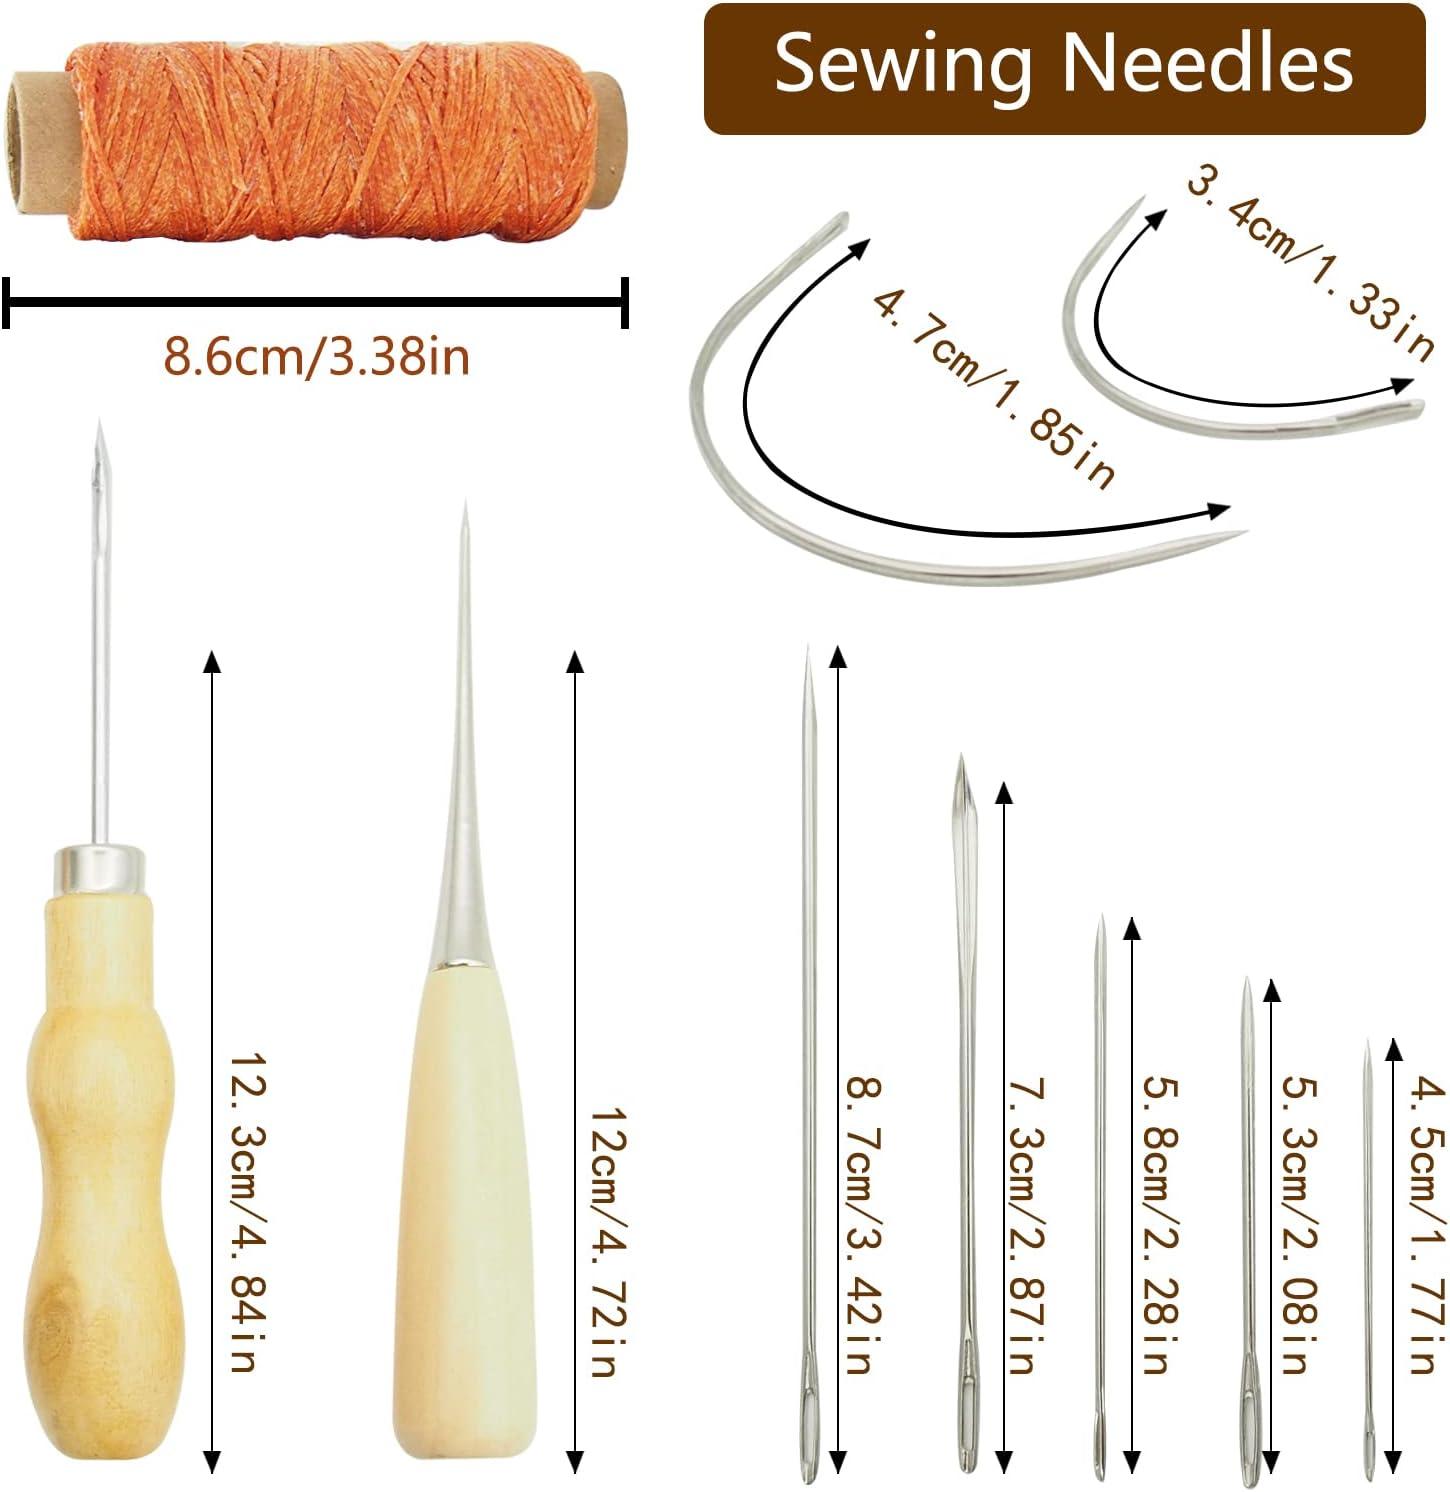  PLANTIONAL Leather Crafting Tools and Supplies: 26 Pieces  Leather Working Tools Set with Groover Awl Waxed Thread Thimble Kit for  Stitching Punching Cutting Sewing Leather Craft Making